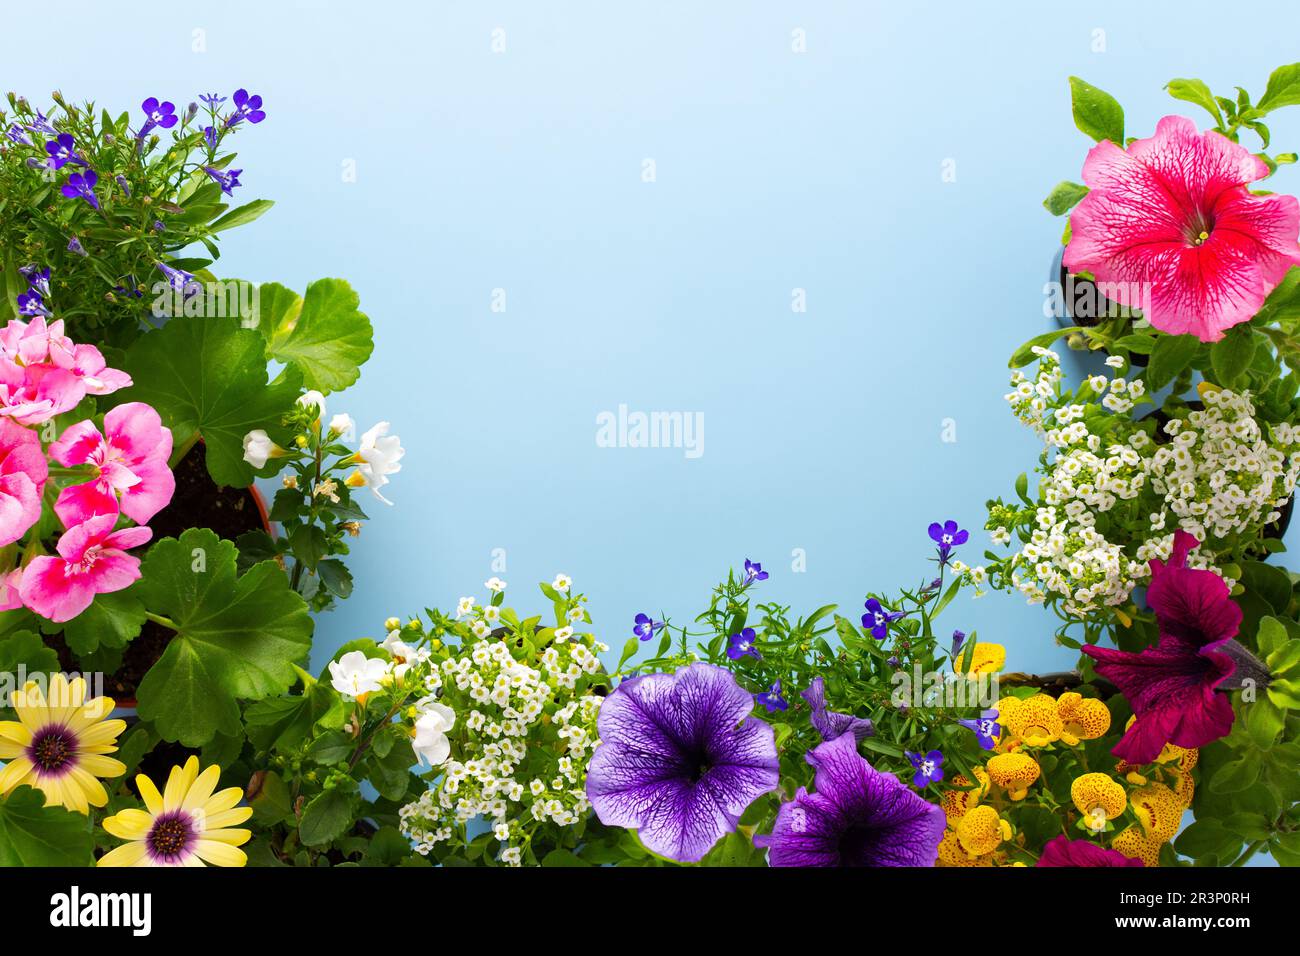 Spring decoration of a home balcony or terrace with flowers, Lobelia and Alyssum, Bacopa and Petunia, Geranium and Osteospermum on a blue background Stock Photo